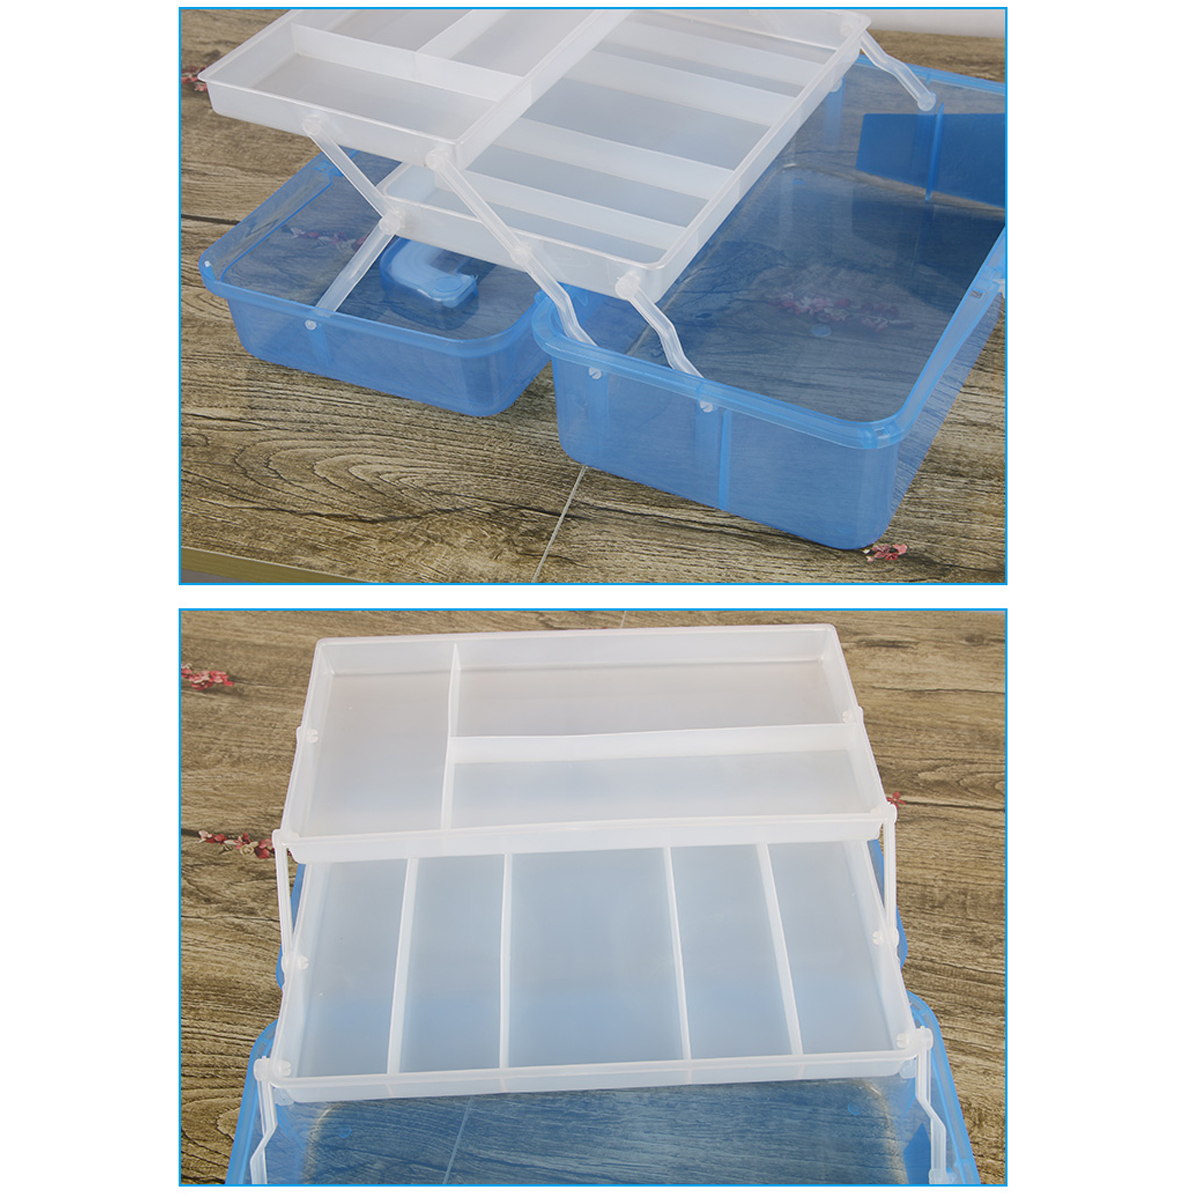 Clear-Plastic-Craft-Makeup-Organizer-Jewelry-Storage-Compartment-Tools-Box-Case-1263882-6